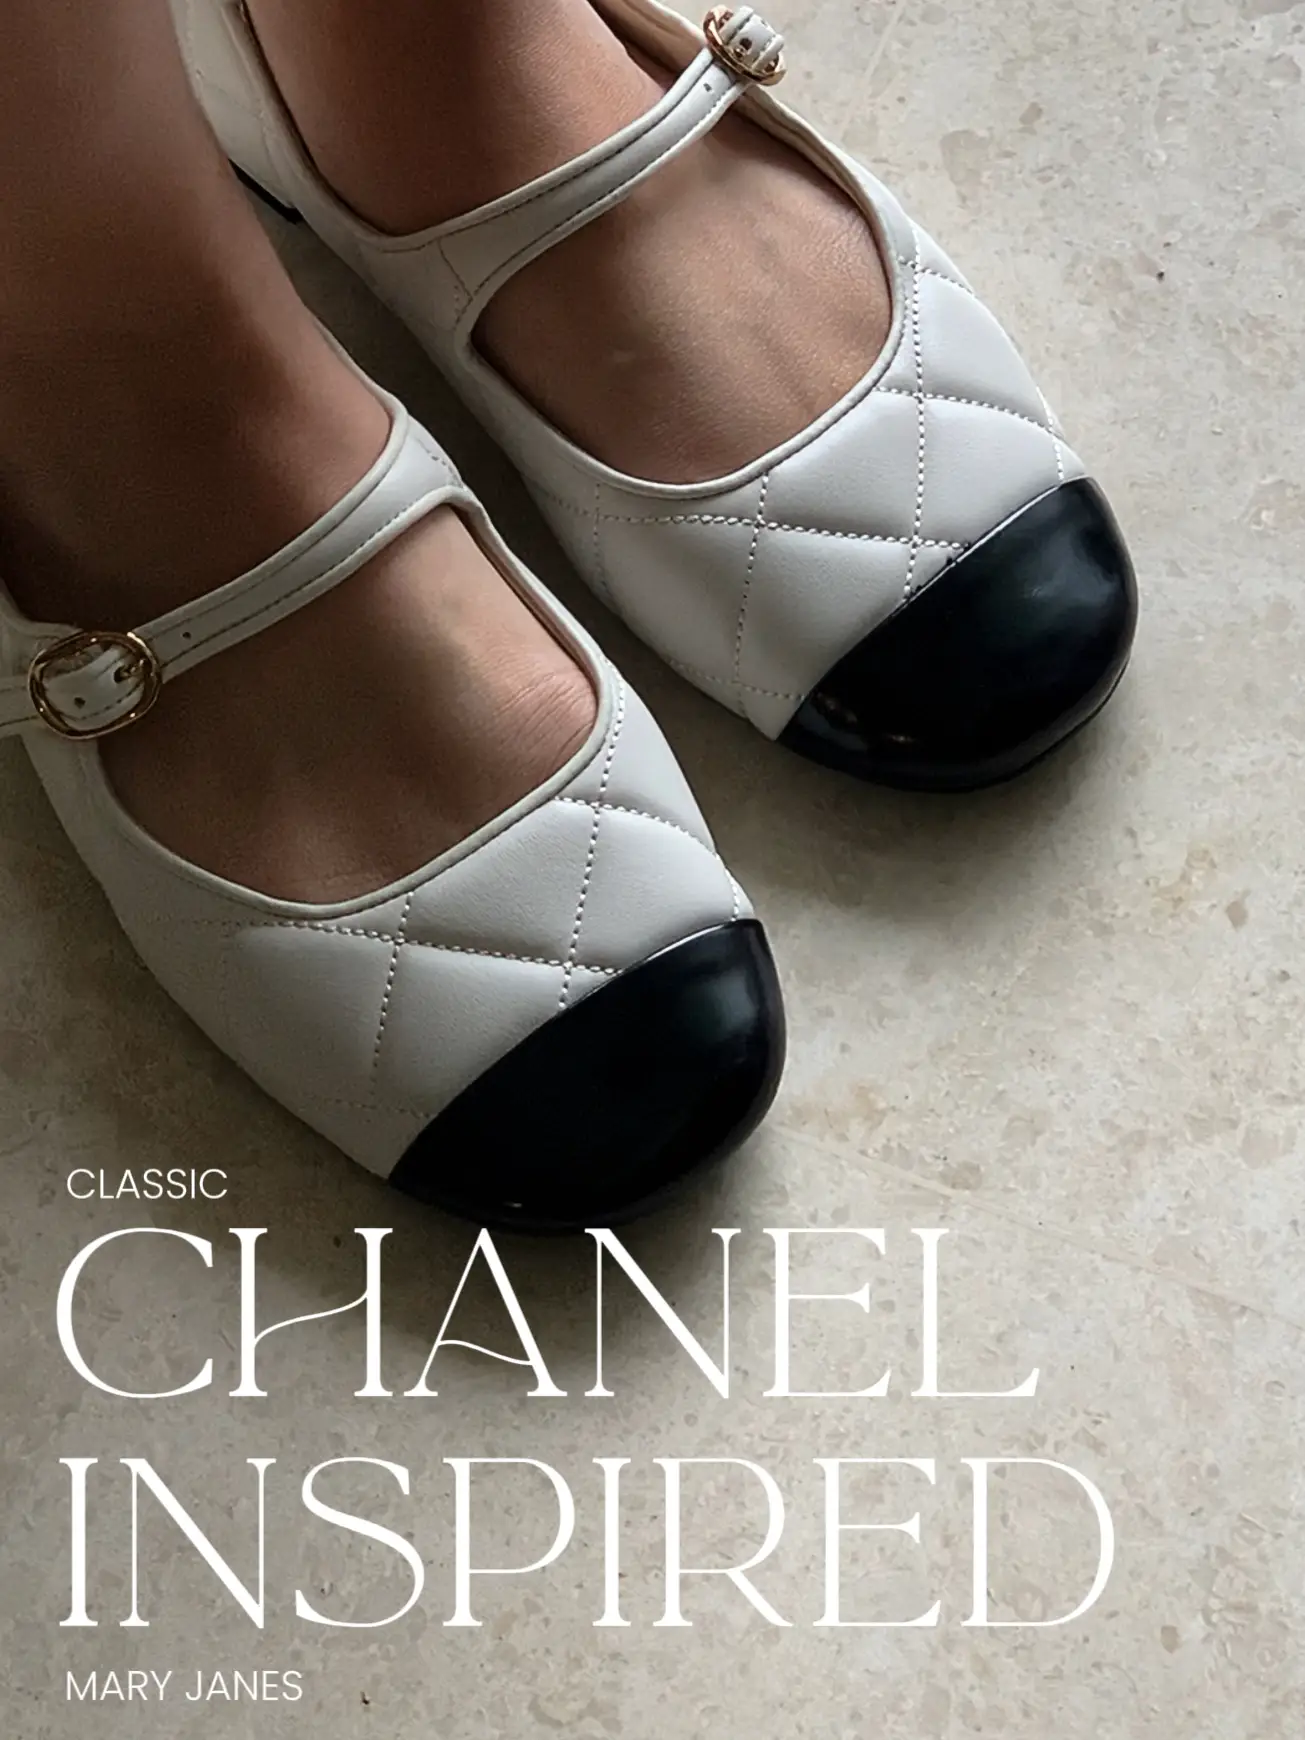 Classic CHANEL inspired shoes 🤍, Gallery posted by Felicia✨